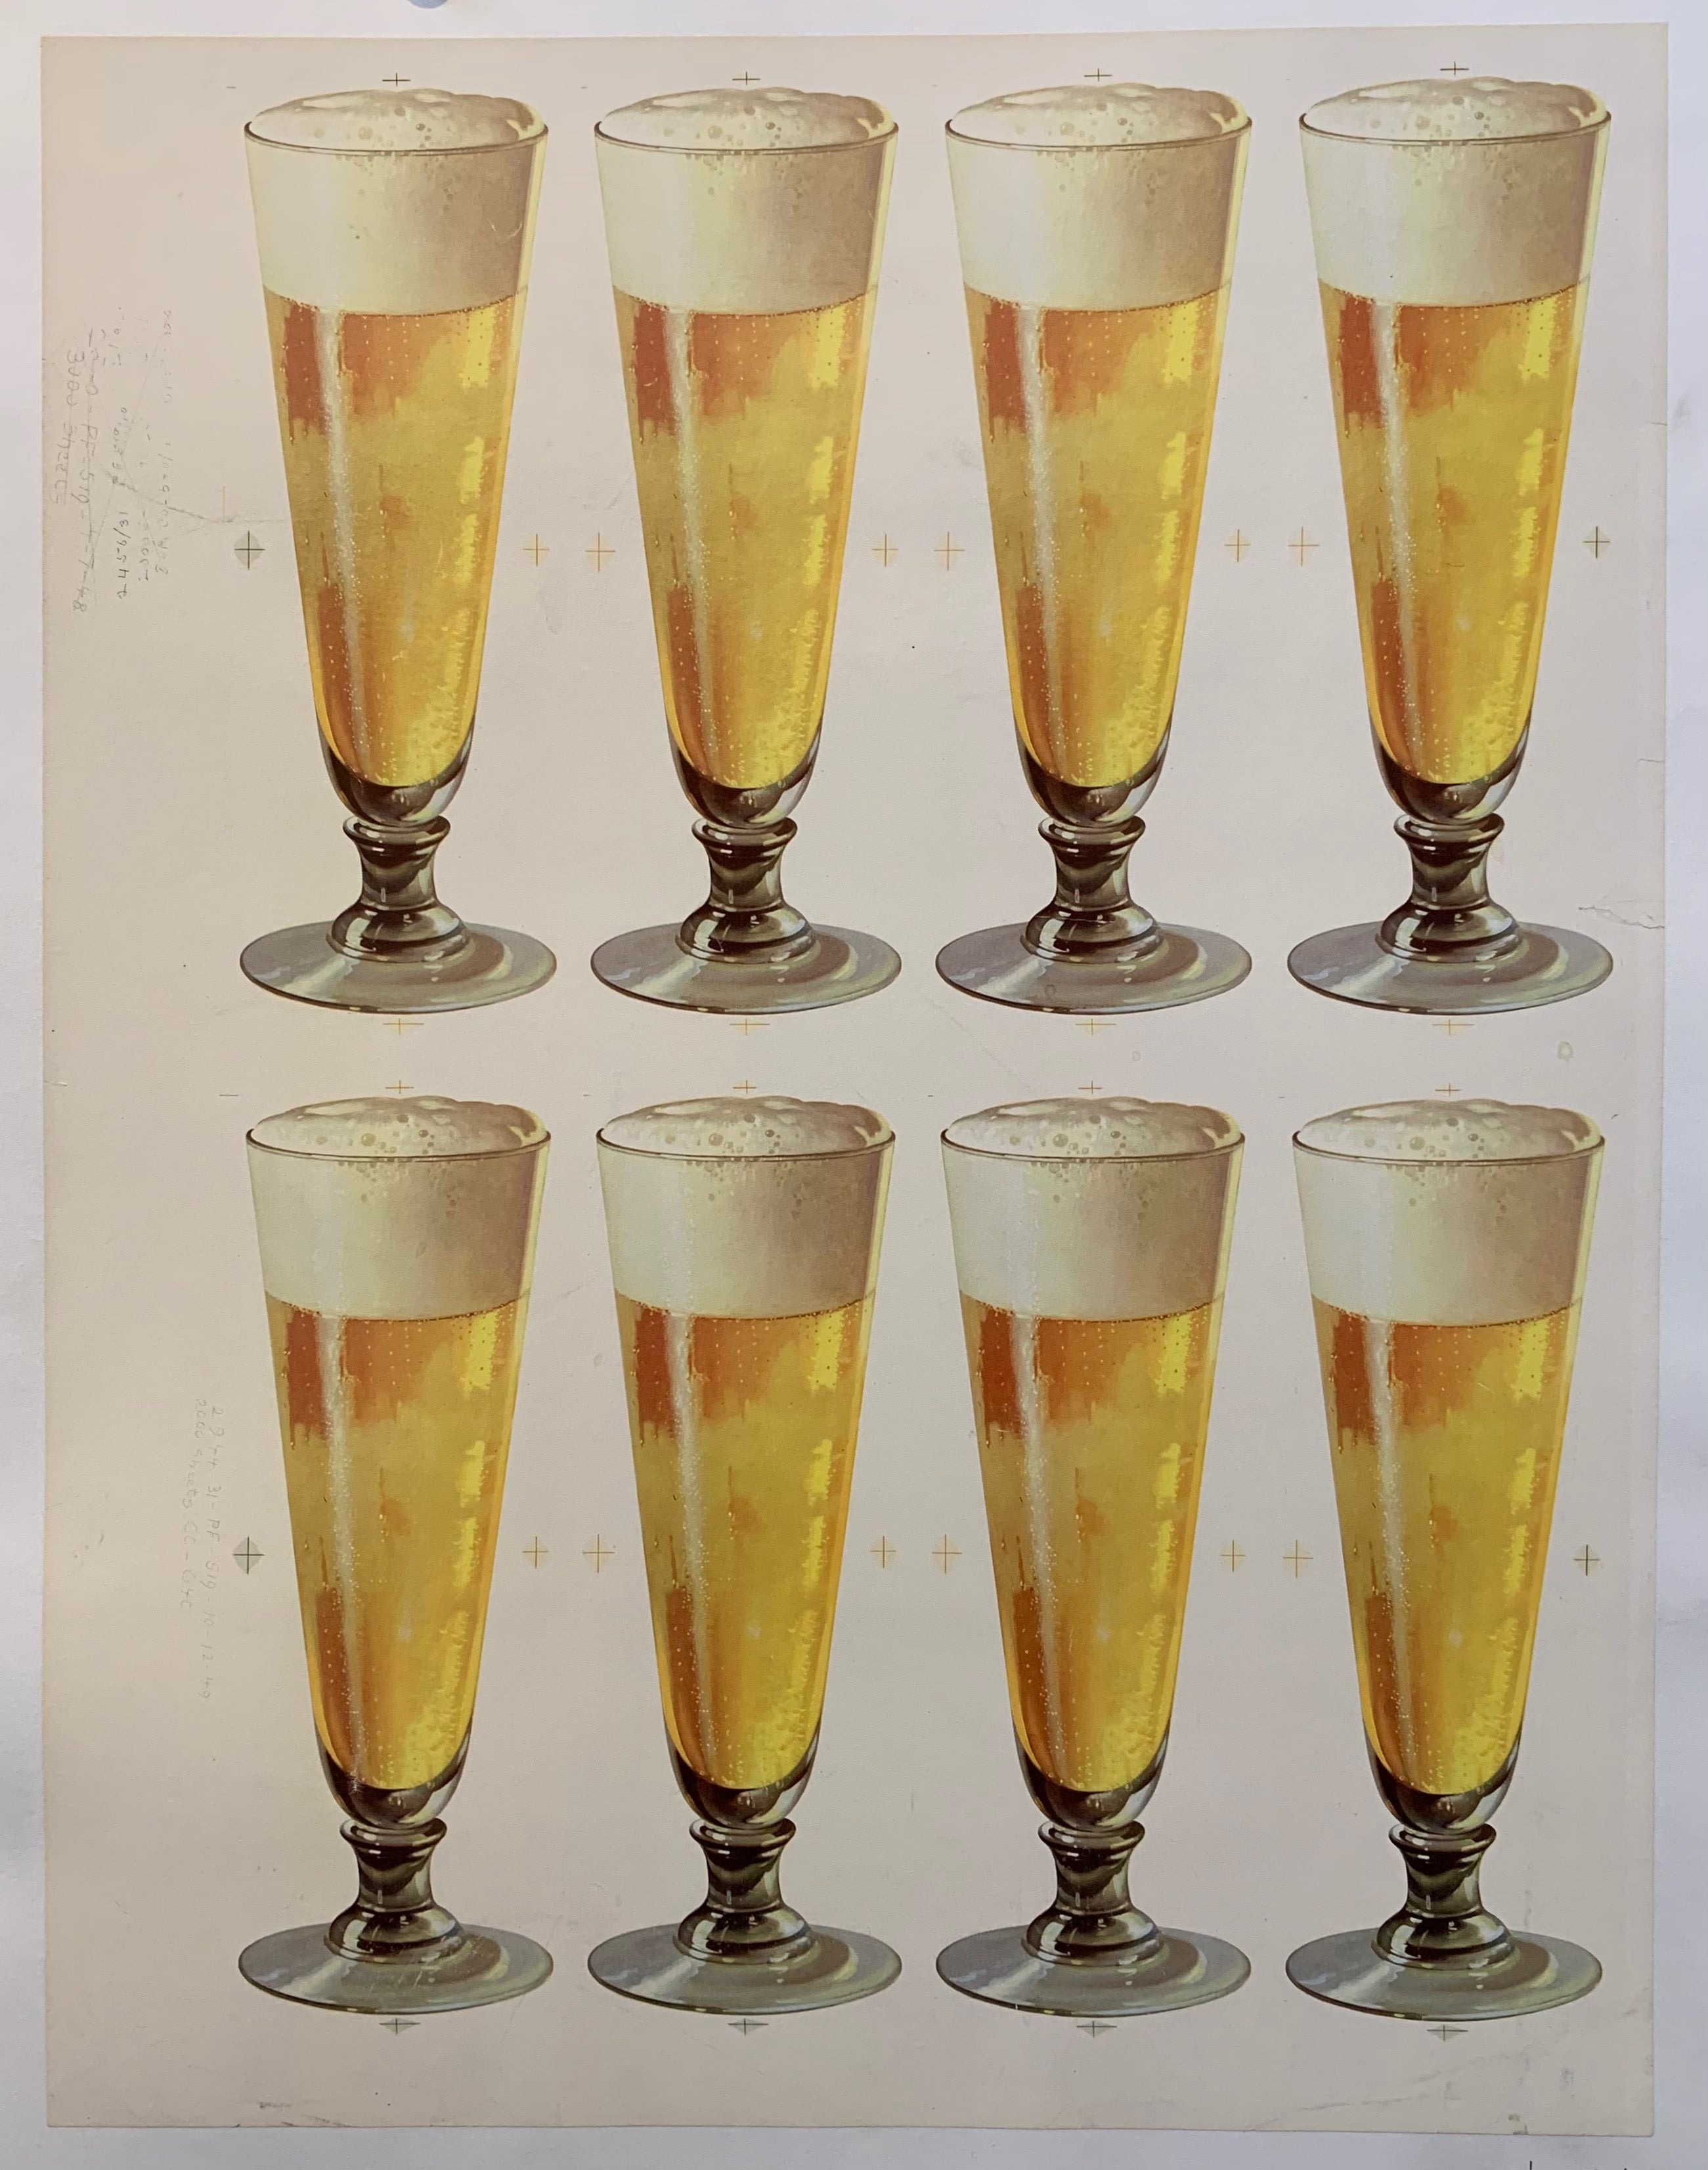 Eight Tall Beers Poster